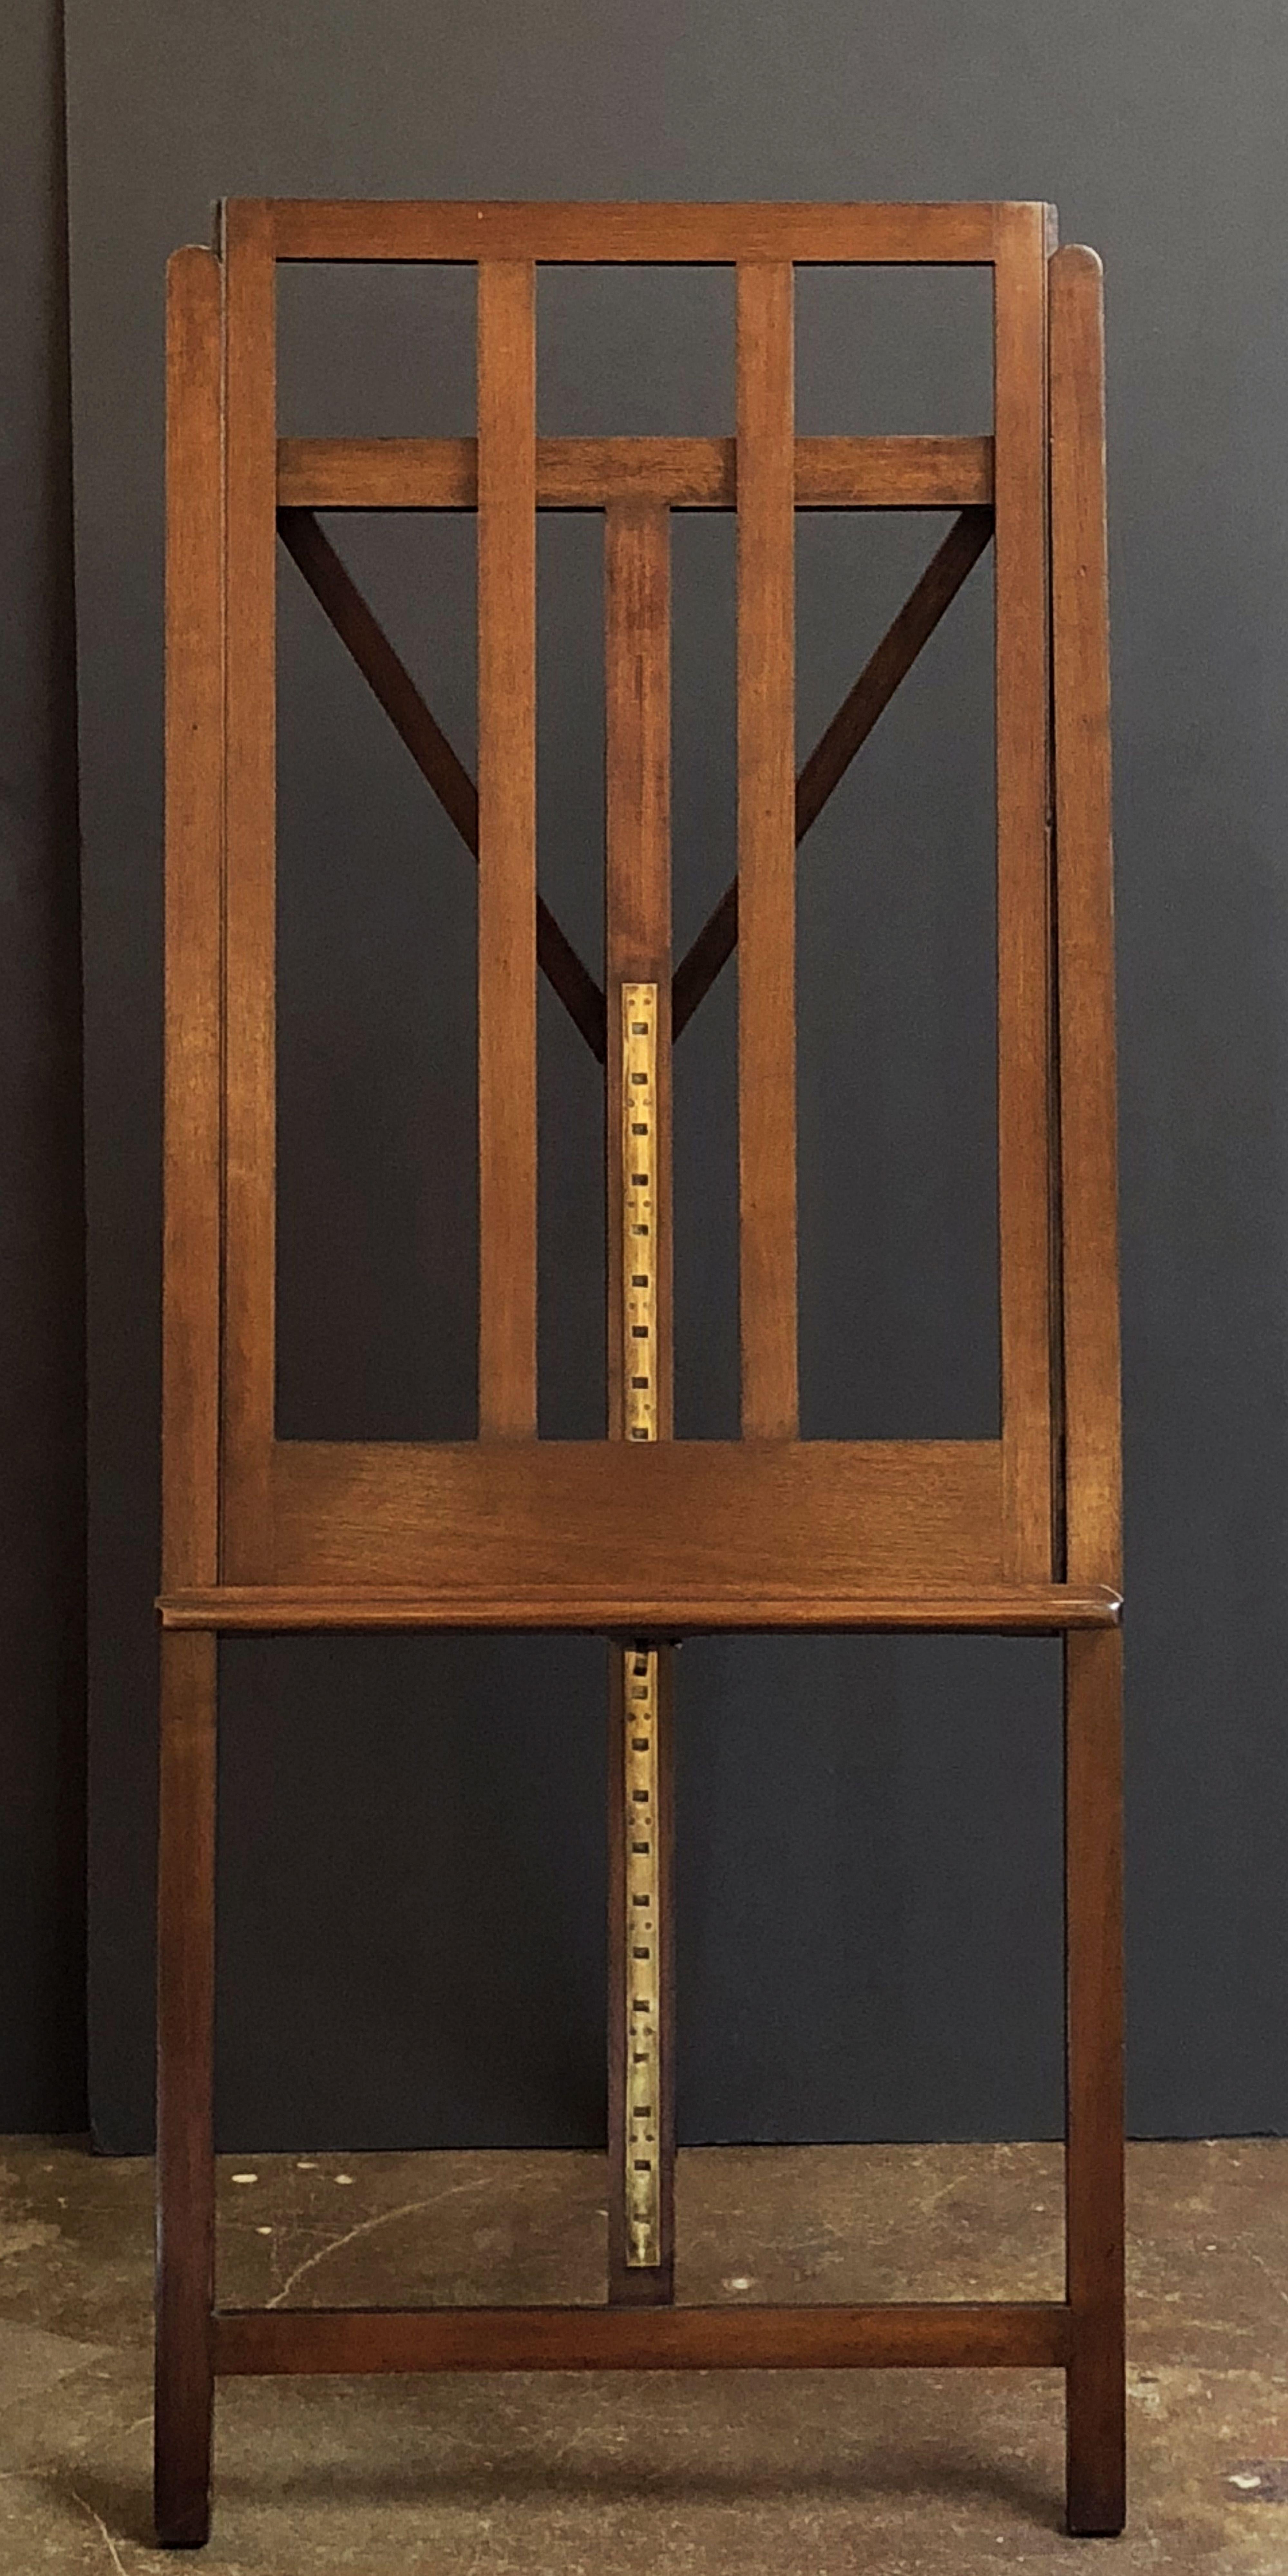 A handsome large English artist's gallery display or studio easel from the early 20th century, featuring a sliding brass and mahogany mechanism to adjust the tray height. Tray can support large-sized canvases or a flat-screen